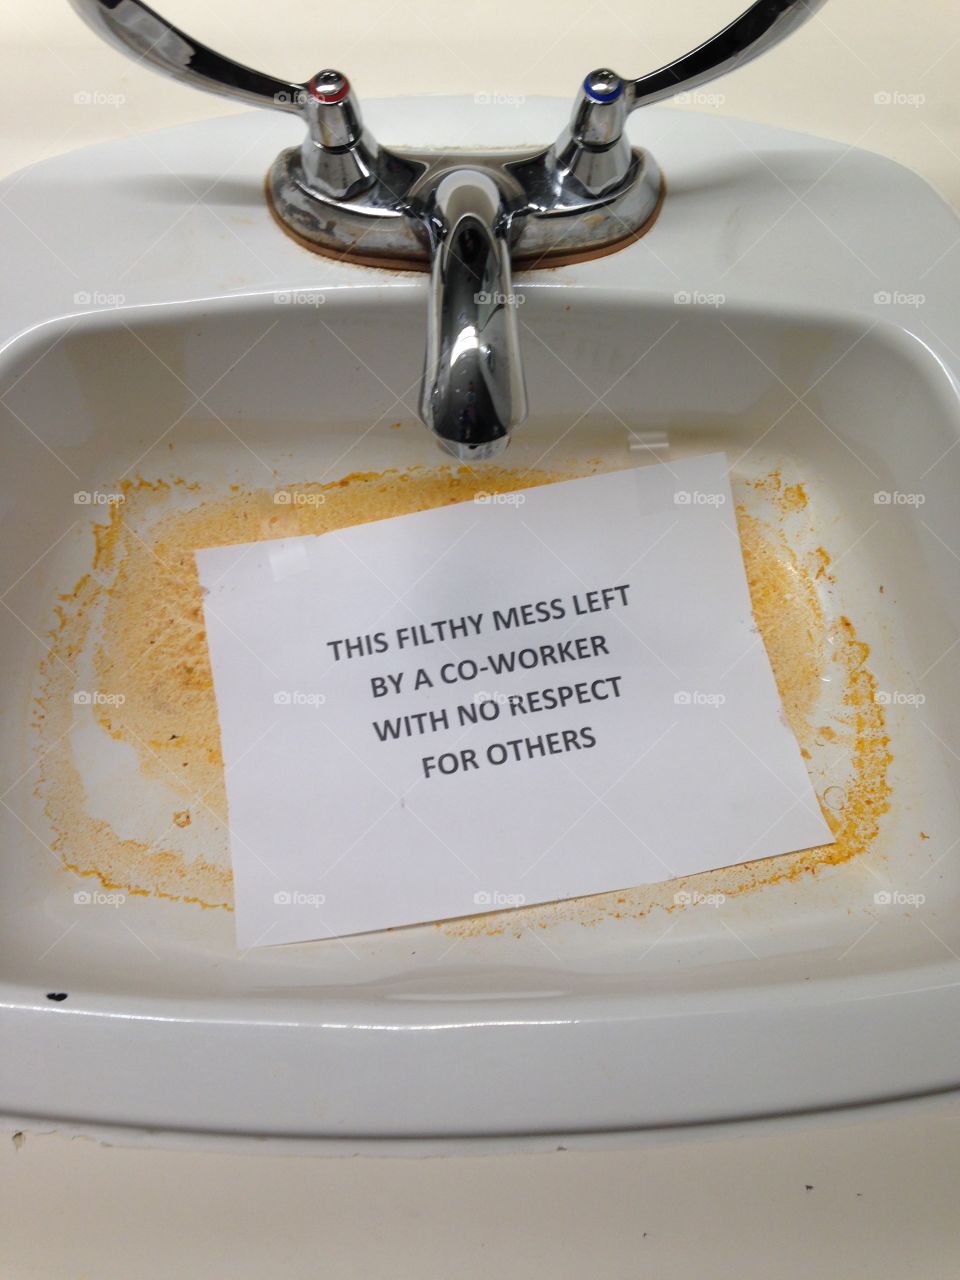 Angry sign "This filthy mess left by a co-worker with no respect for others" laying in filthy sink.